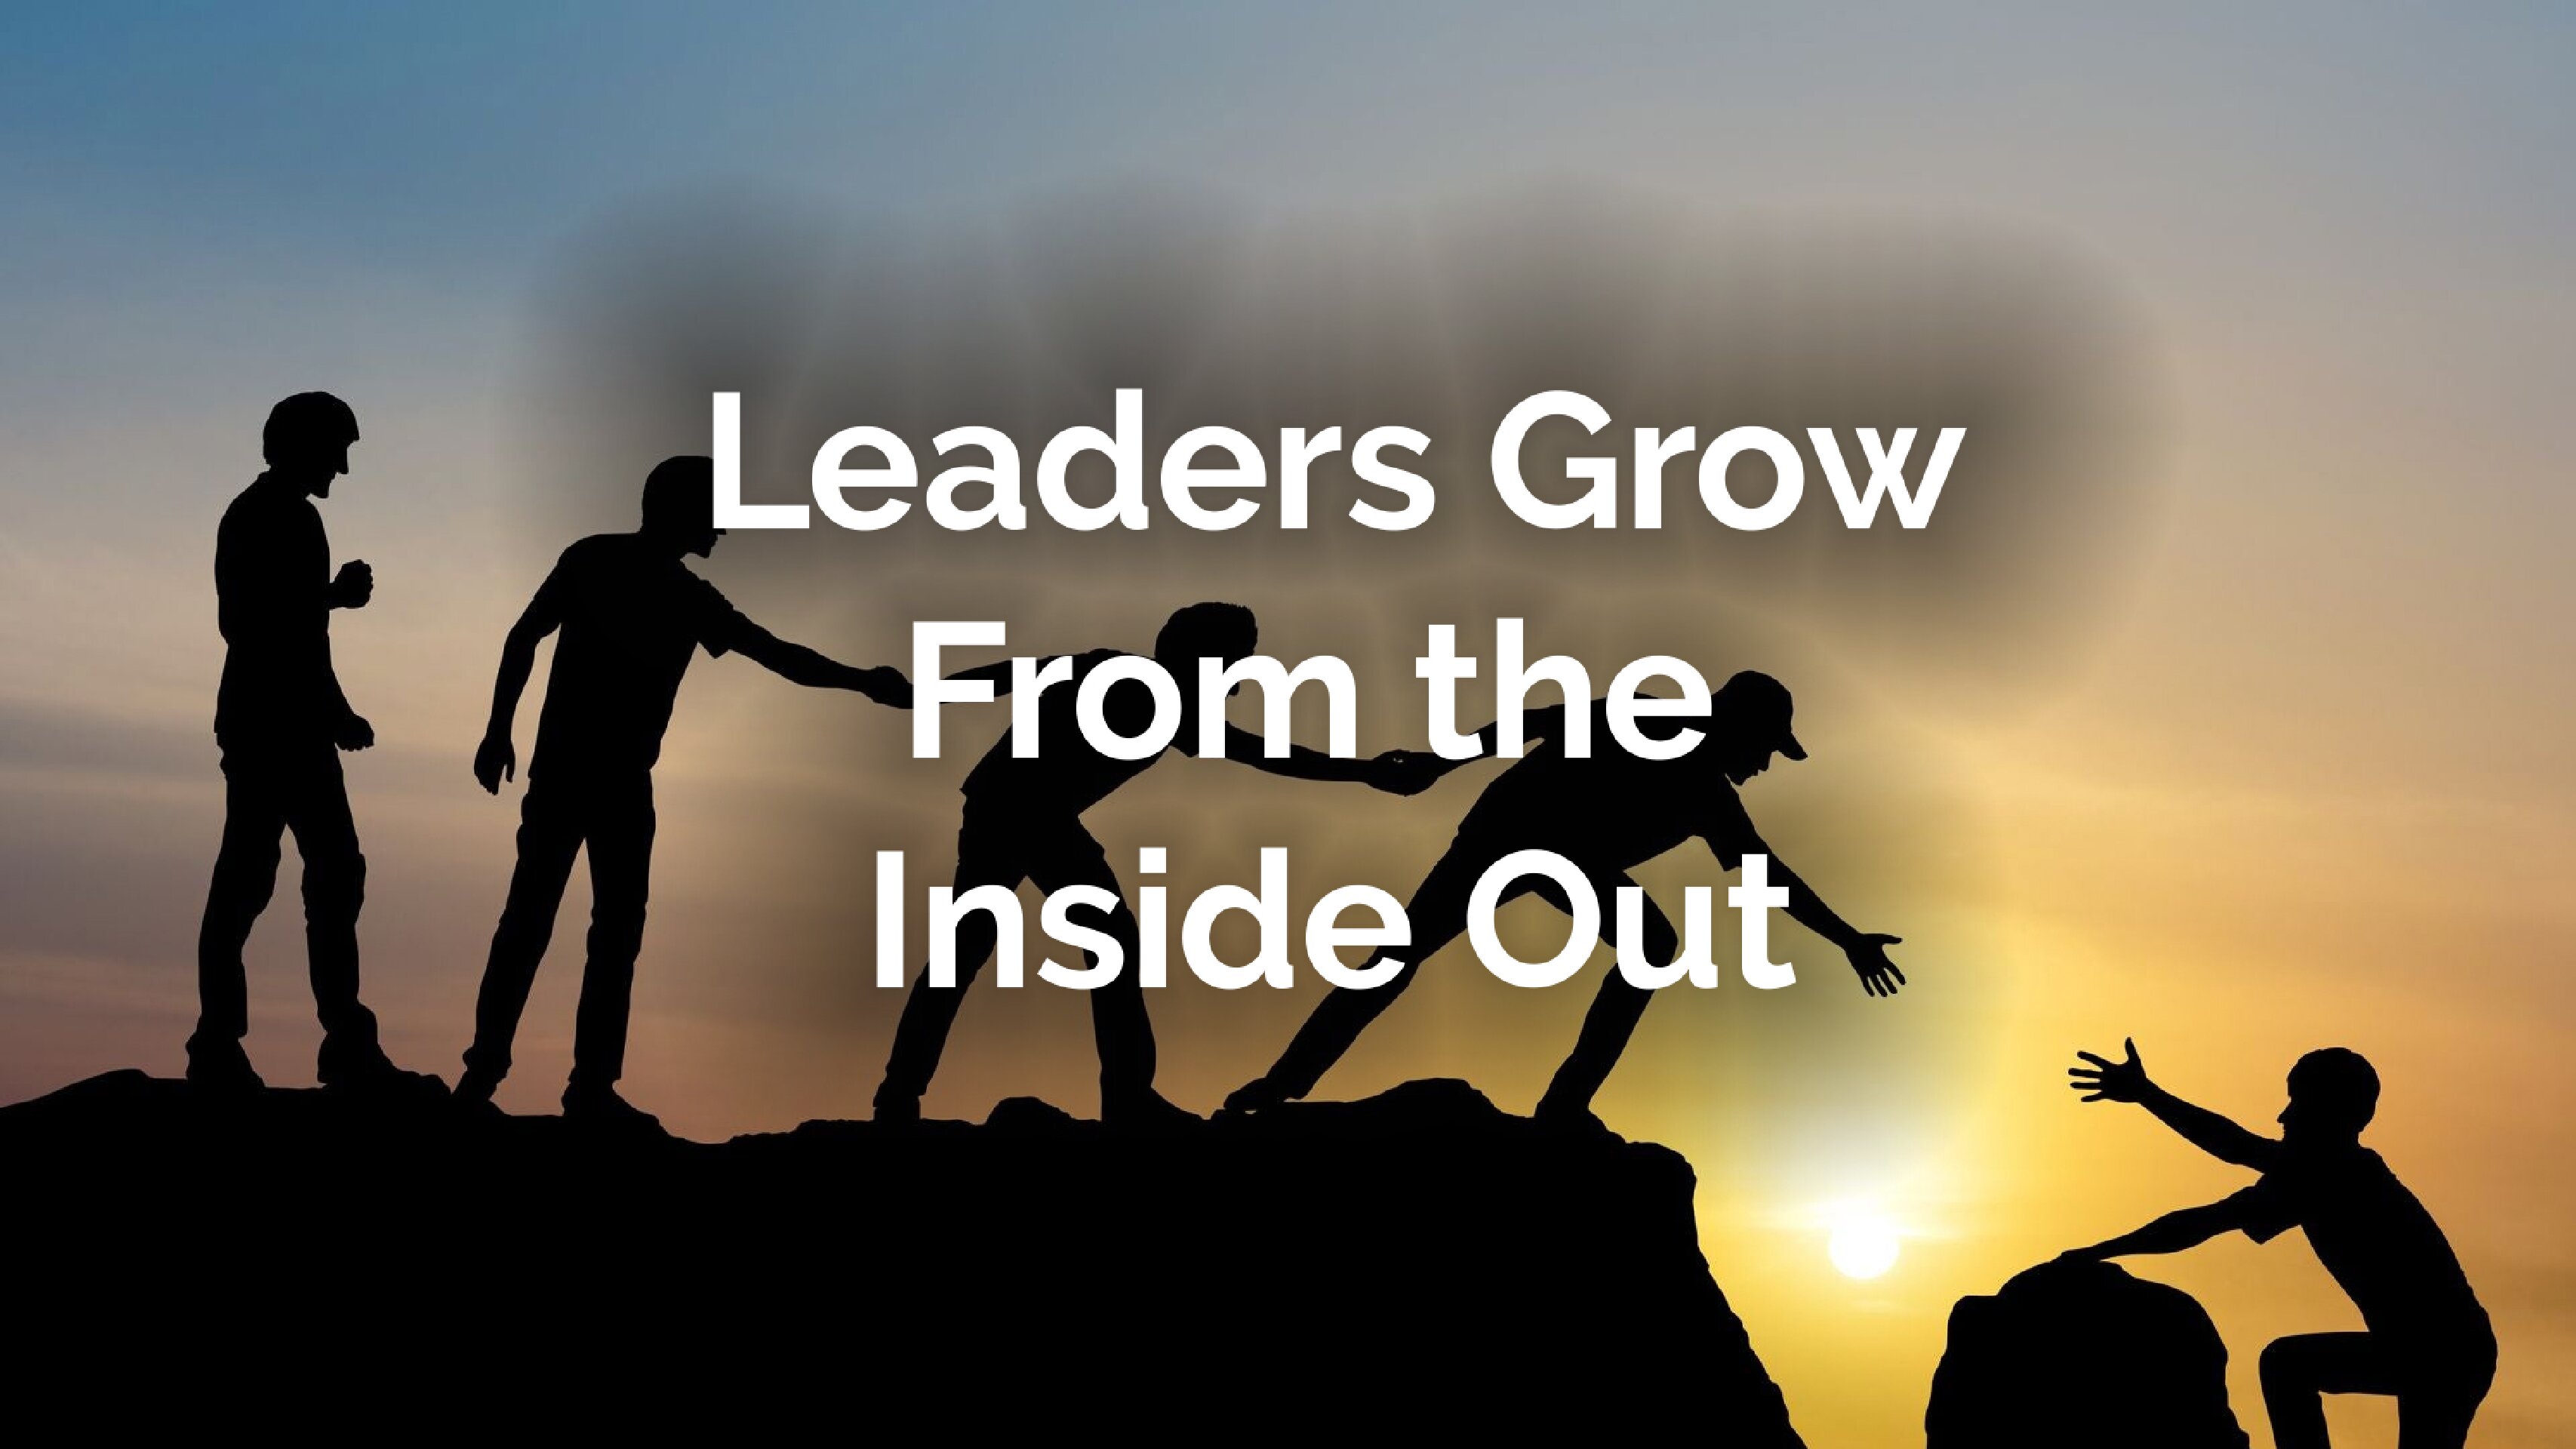 Leaders Grow from the Inside Out